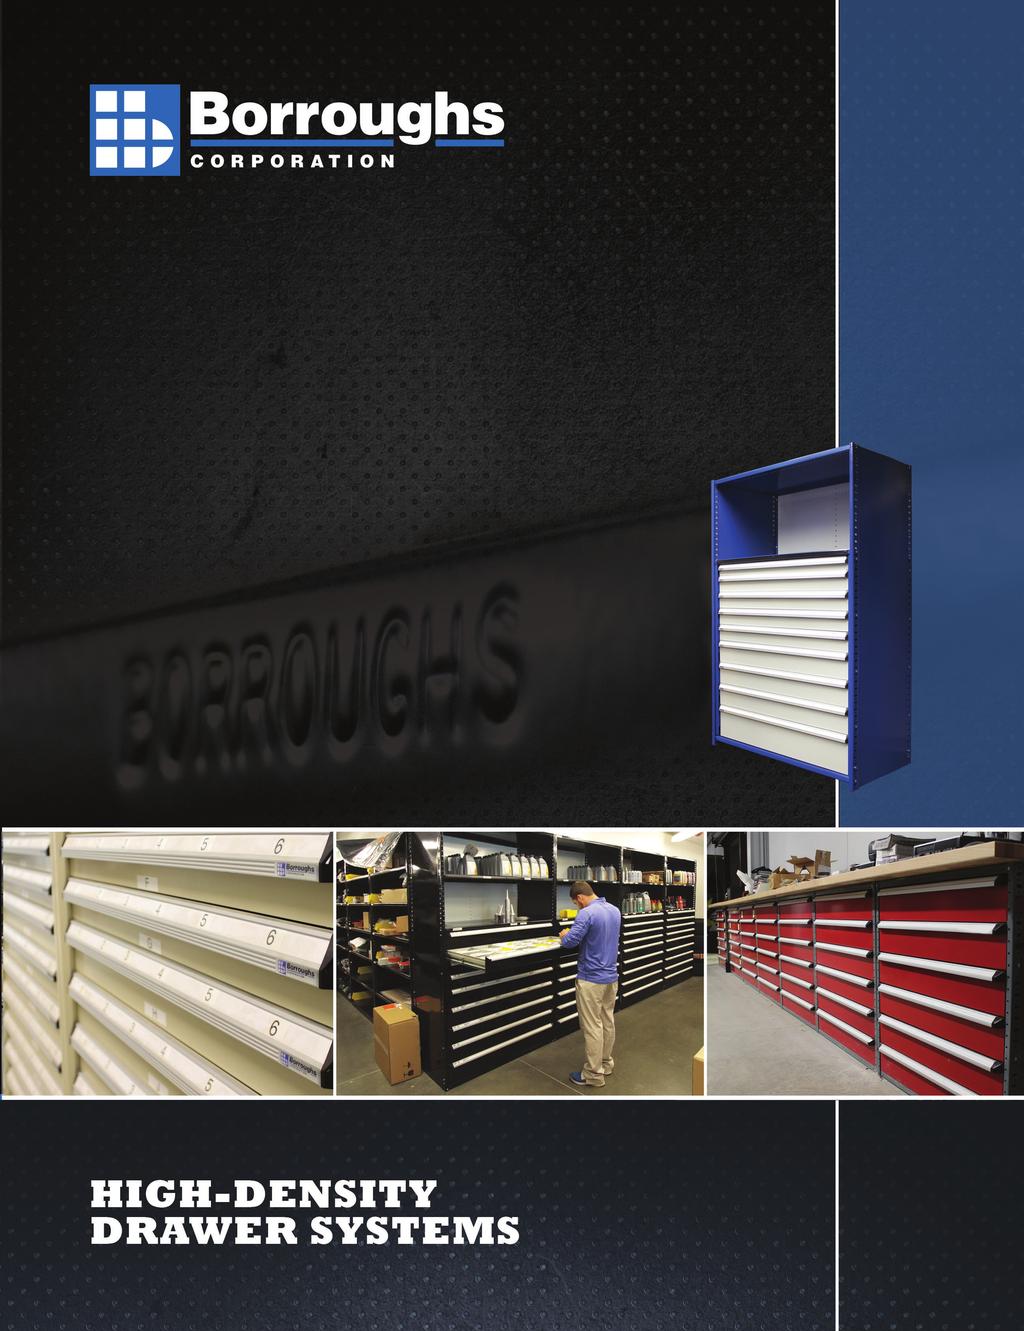 Borroughs Standard Powder Coat Colors Borroughs powder coat finishes are high quality, durable and inert. Borroughs offers 7 standard colors.